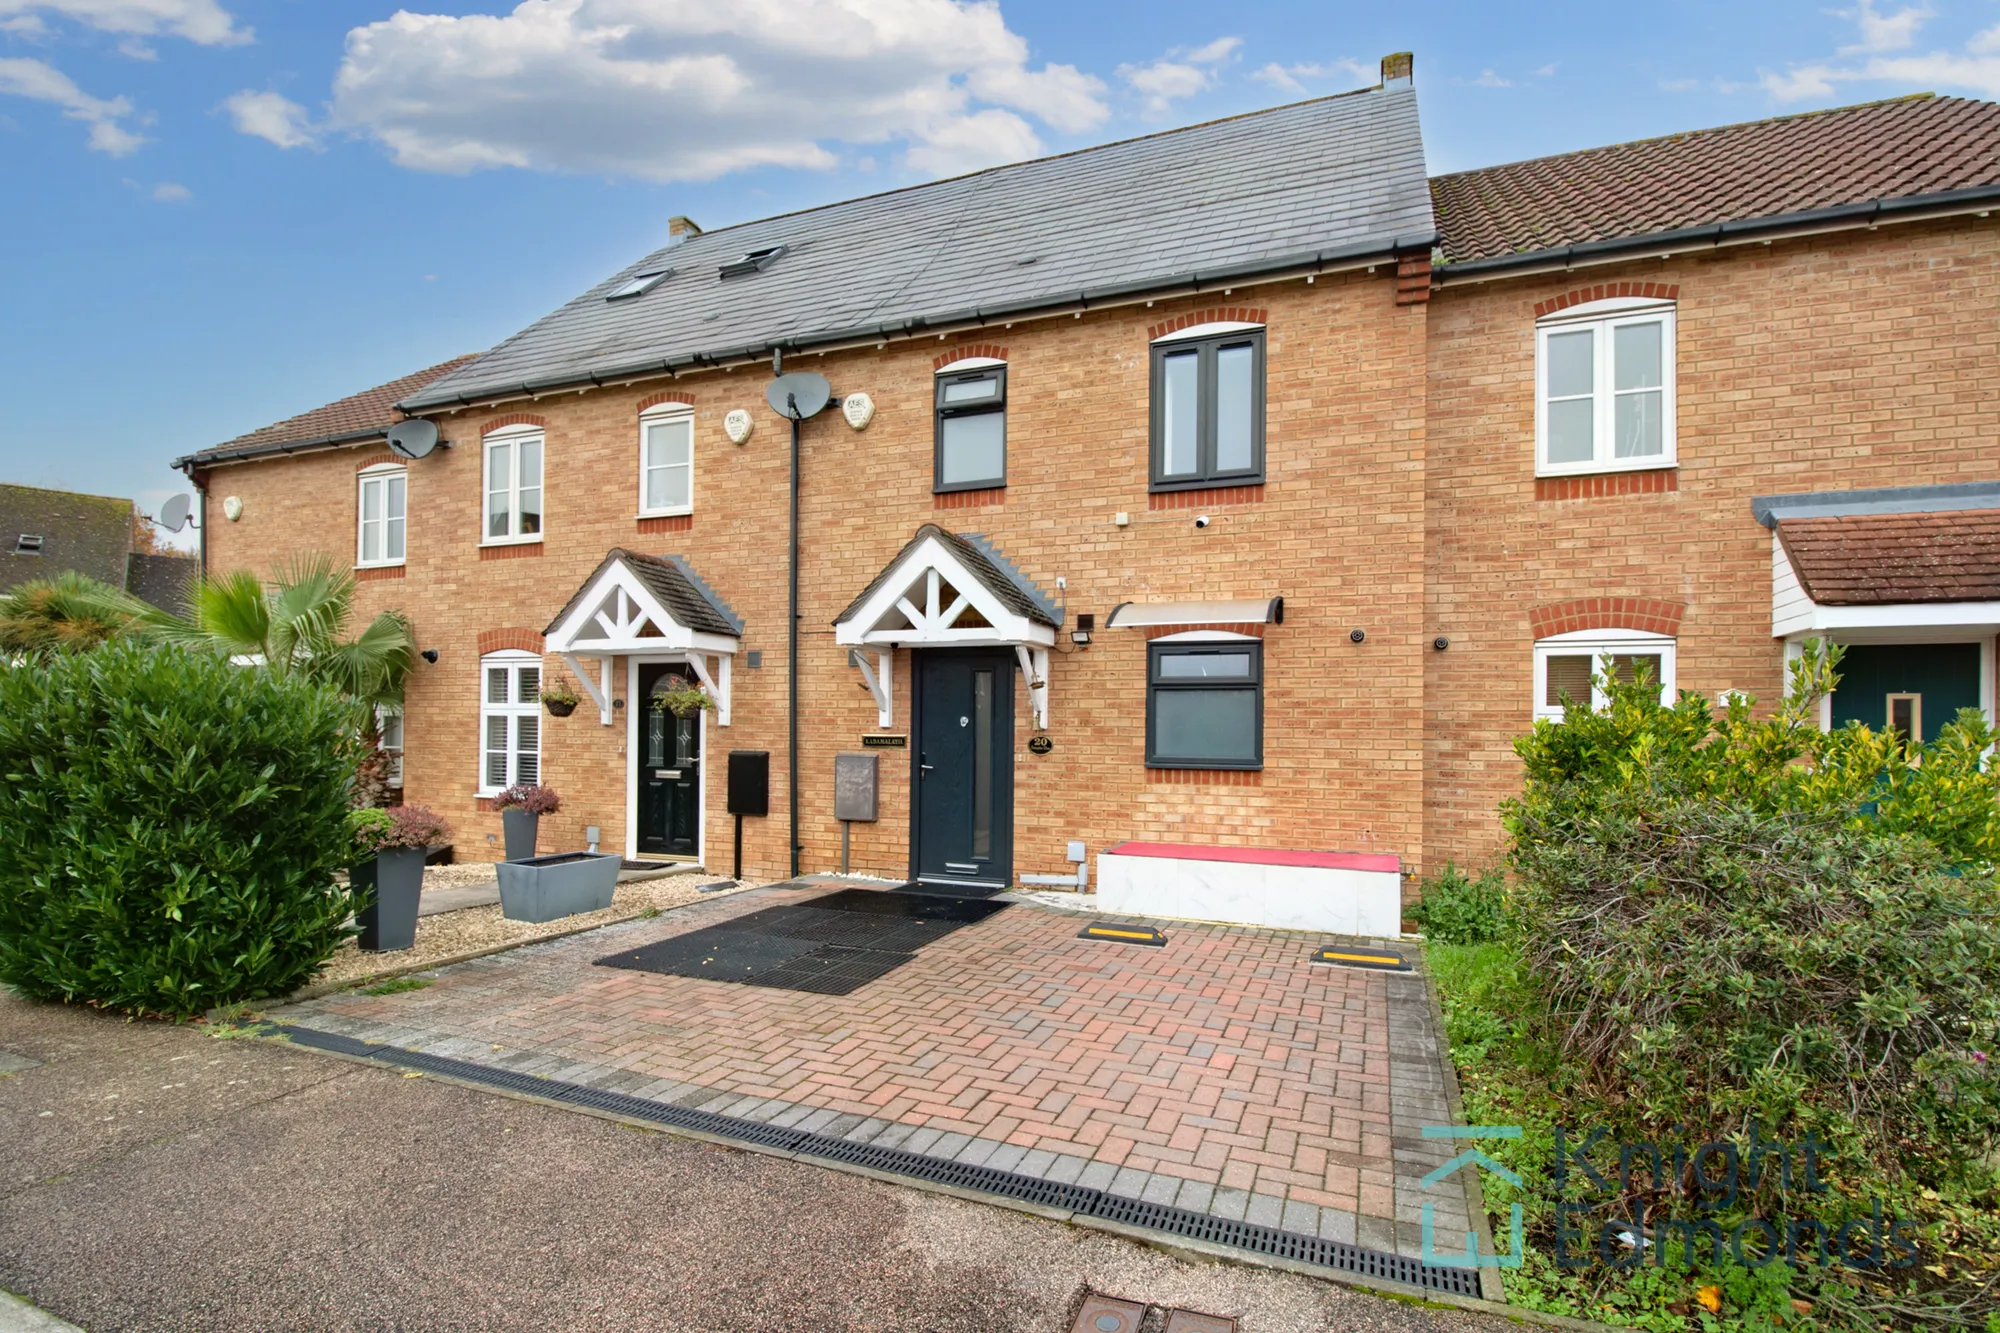 3 bed terraced house for sale in Farington Close, Maidstone, ME16